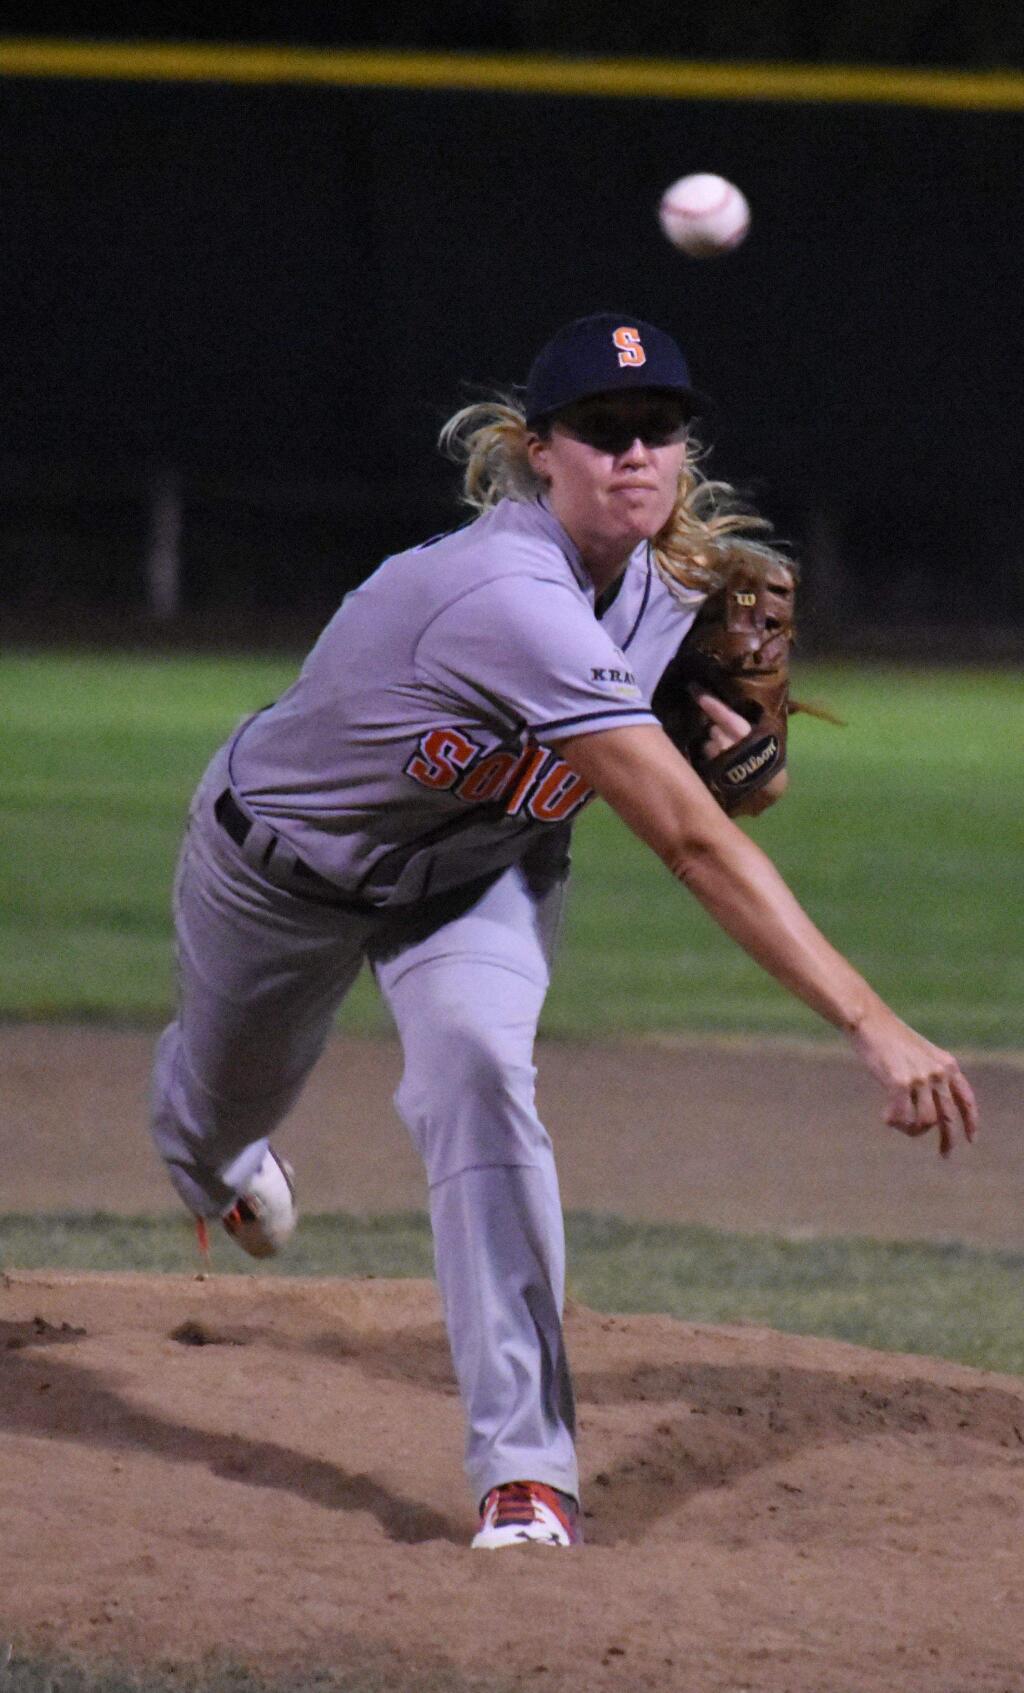 Sonoma Stompers pitcher Stacy Piagno. (James W. Toy III / Sonoma Stompers)